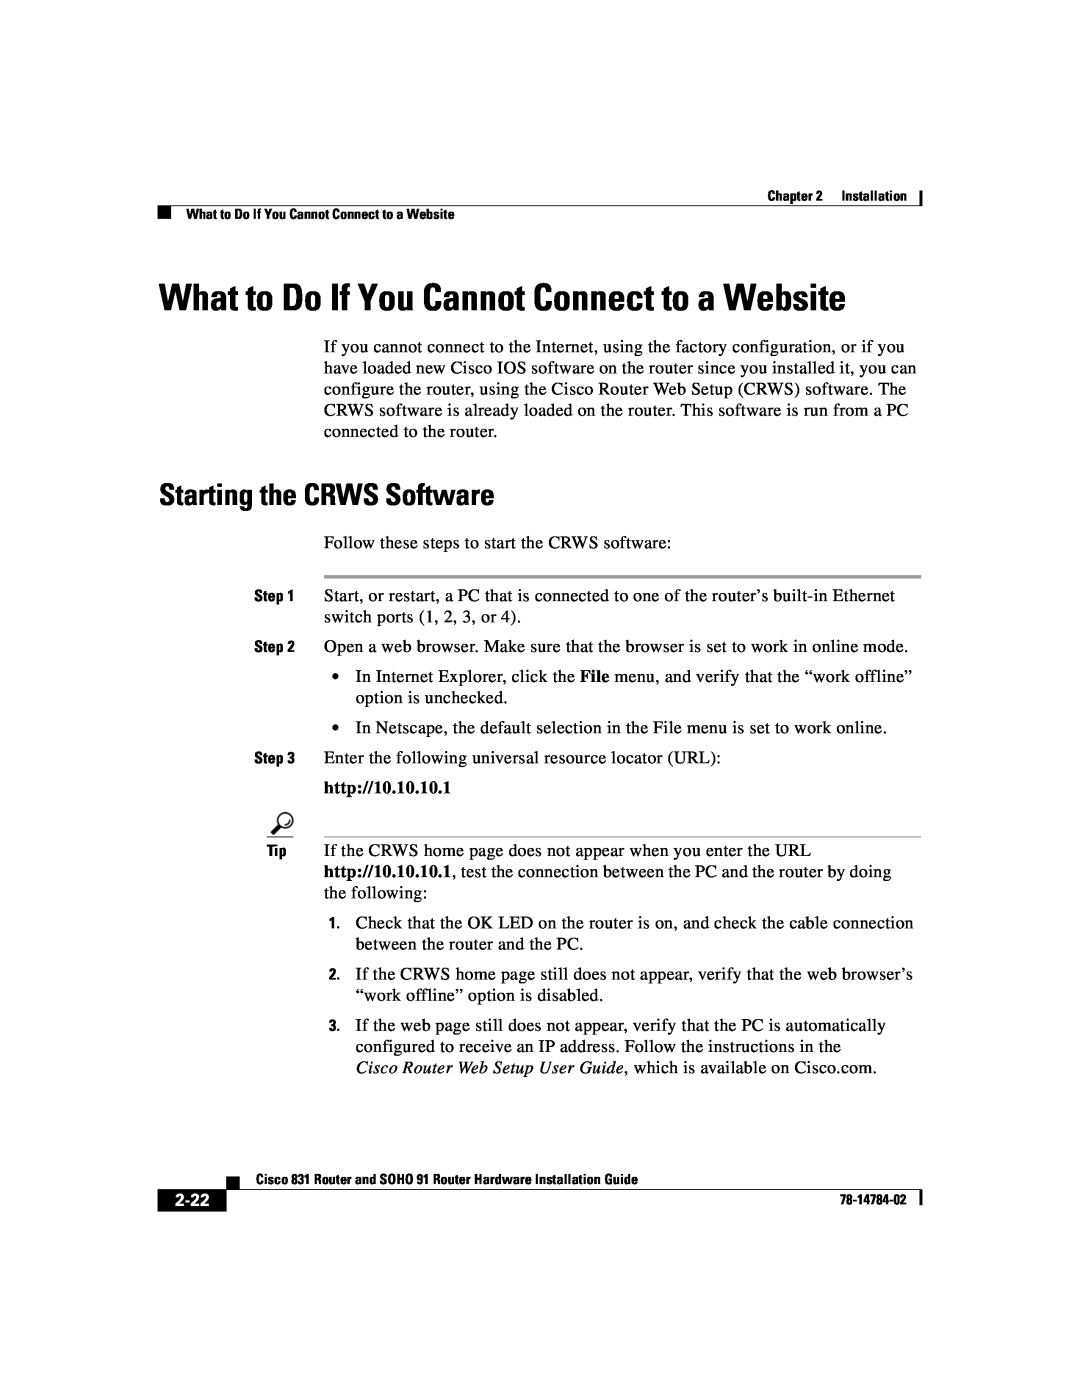 Cisco Systems 78-14784-02 Starting the CRWS Software, What to Do If You Cannot Connect to a Website, http//10.10.10.1 